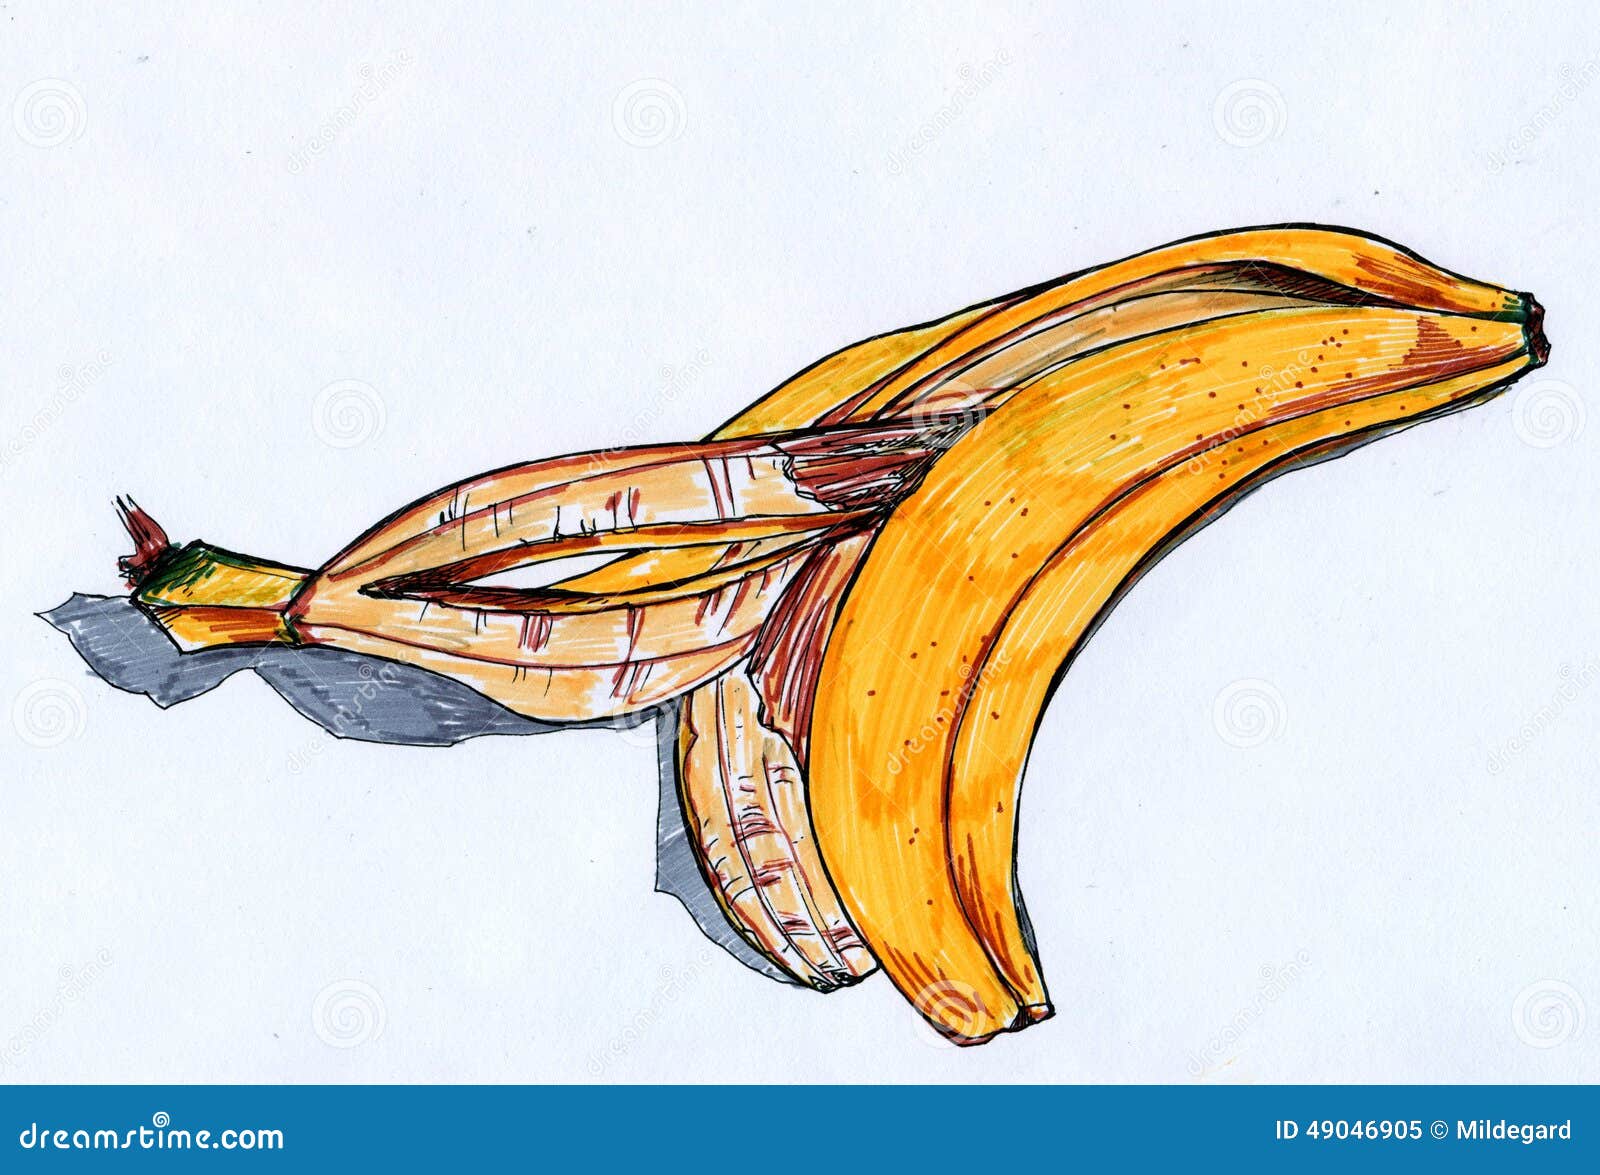 How to Draw a Banana // Easy Way to Draw Realistic Banana // 3D Pencil Sketch  Drawing - YouTube